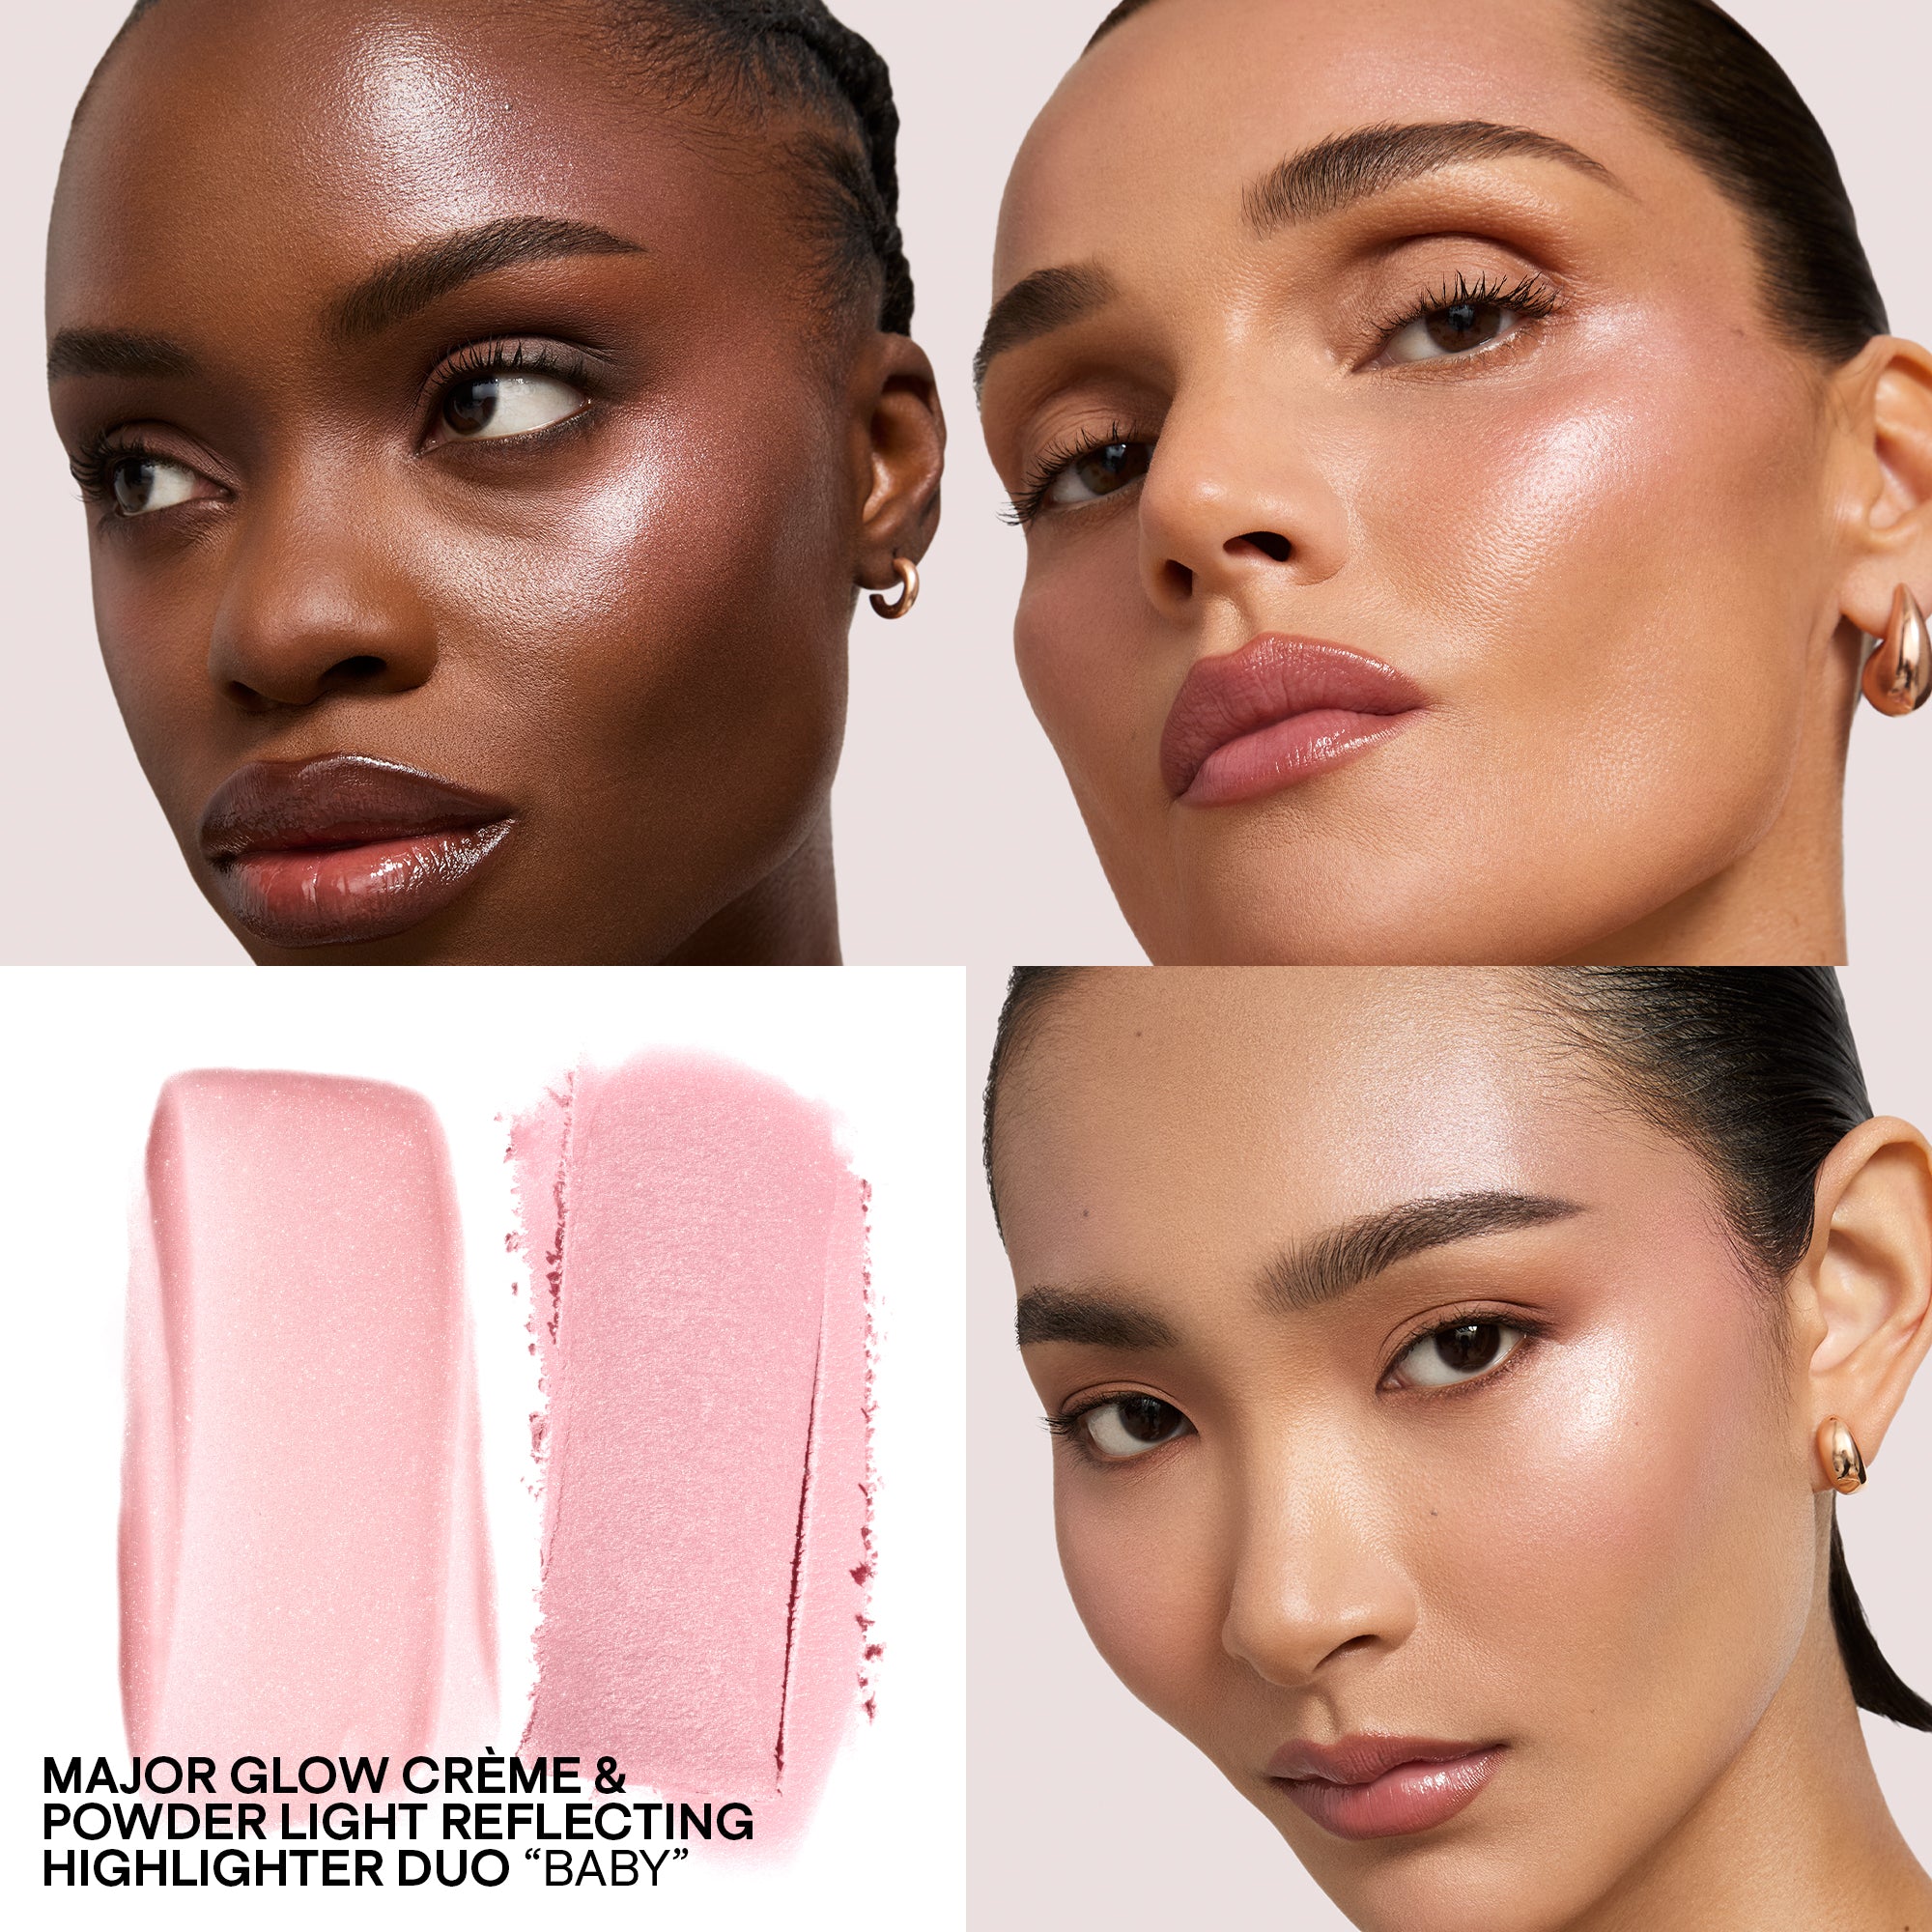 Major Glow Crème & Powder Light Reflecting Translucent Highlighter Duo (Baby)